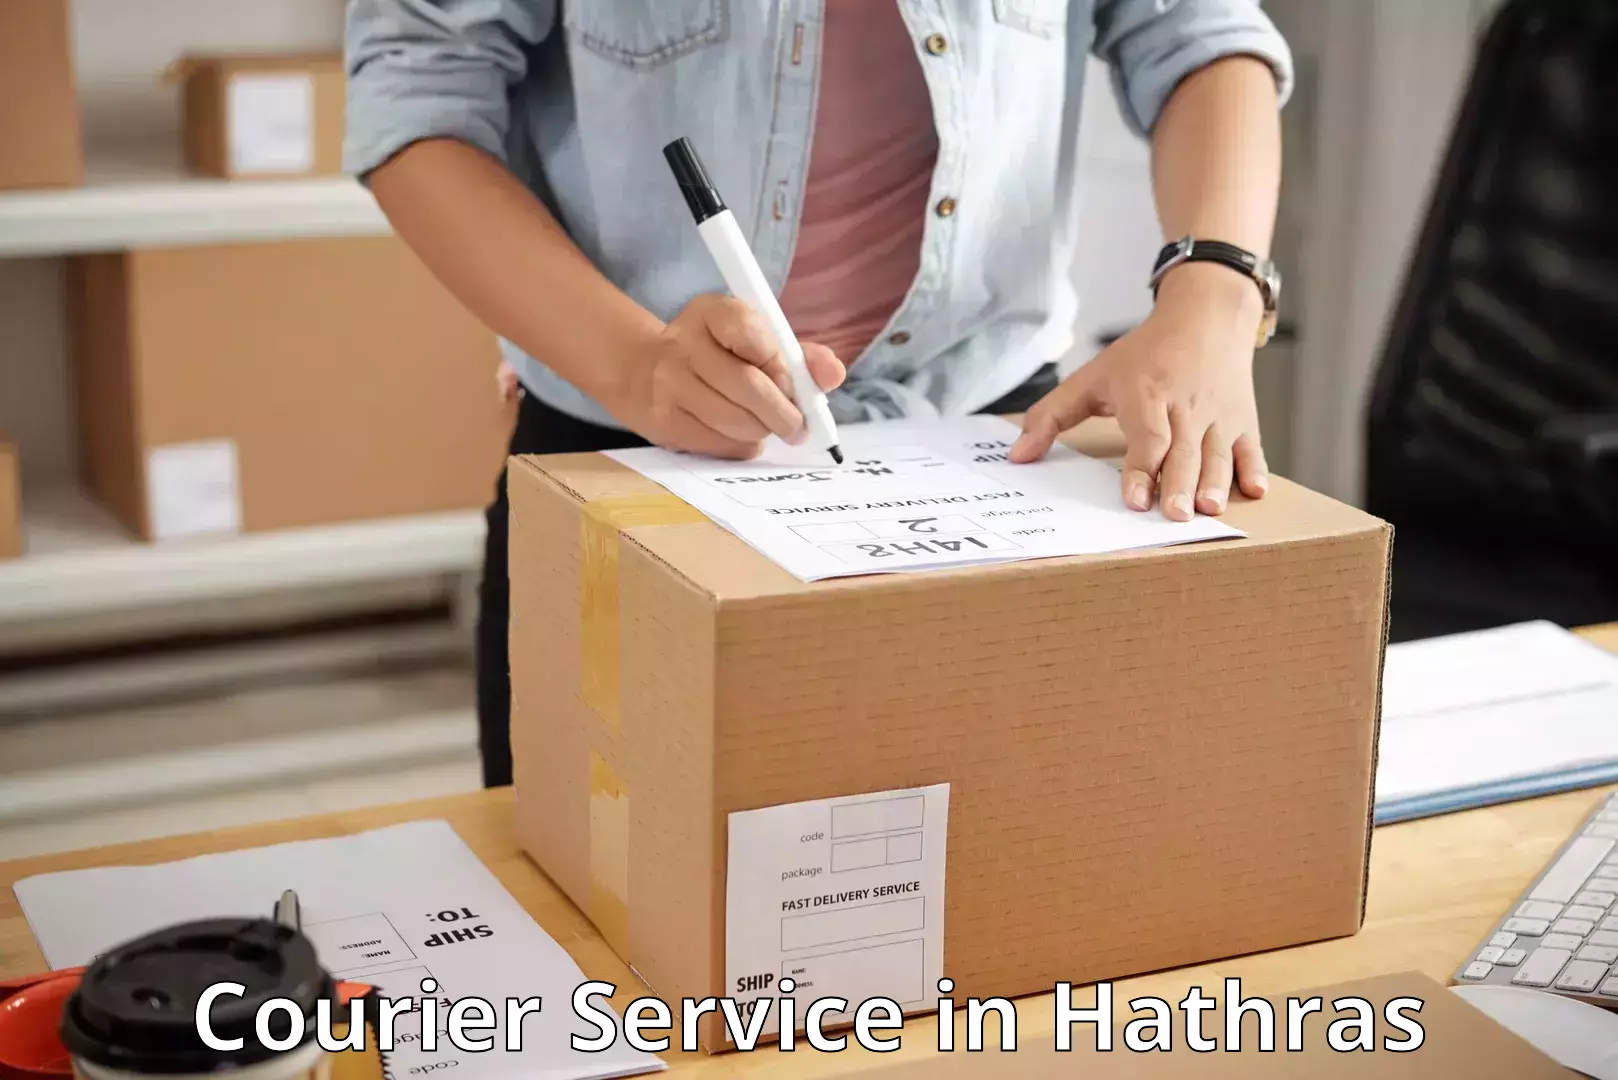 Specialized courier services in Hathras